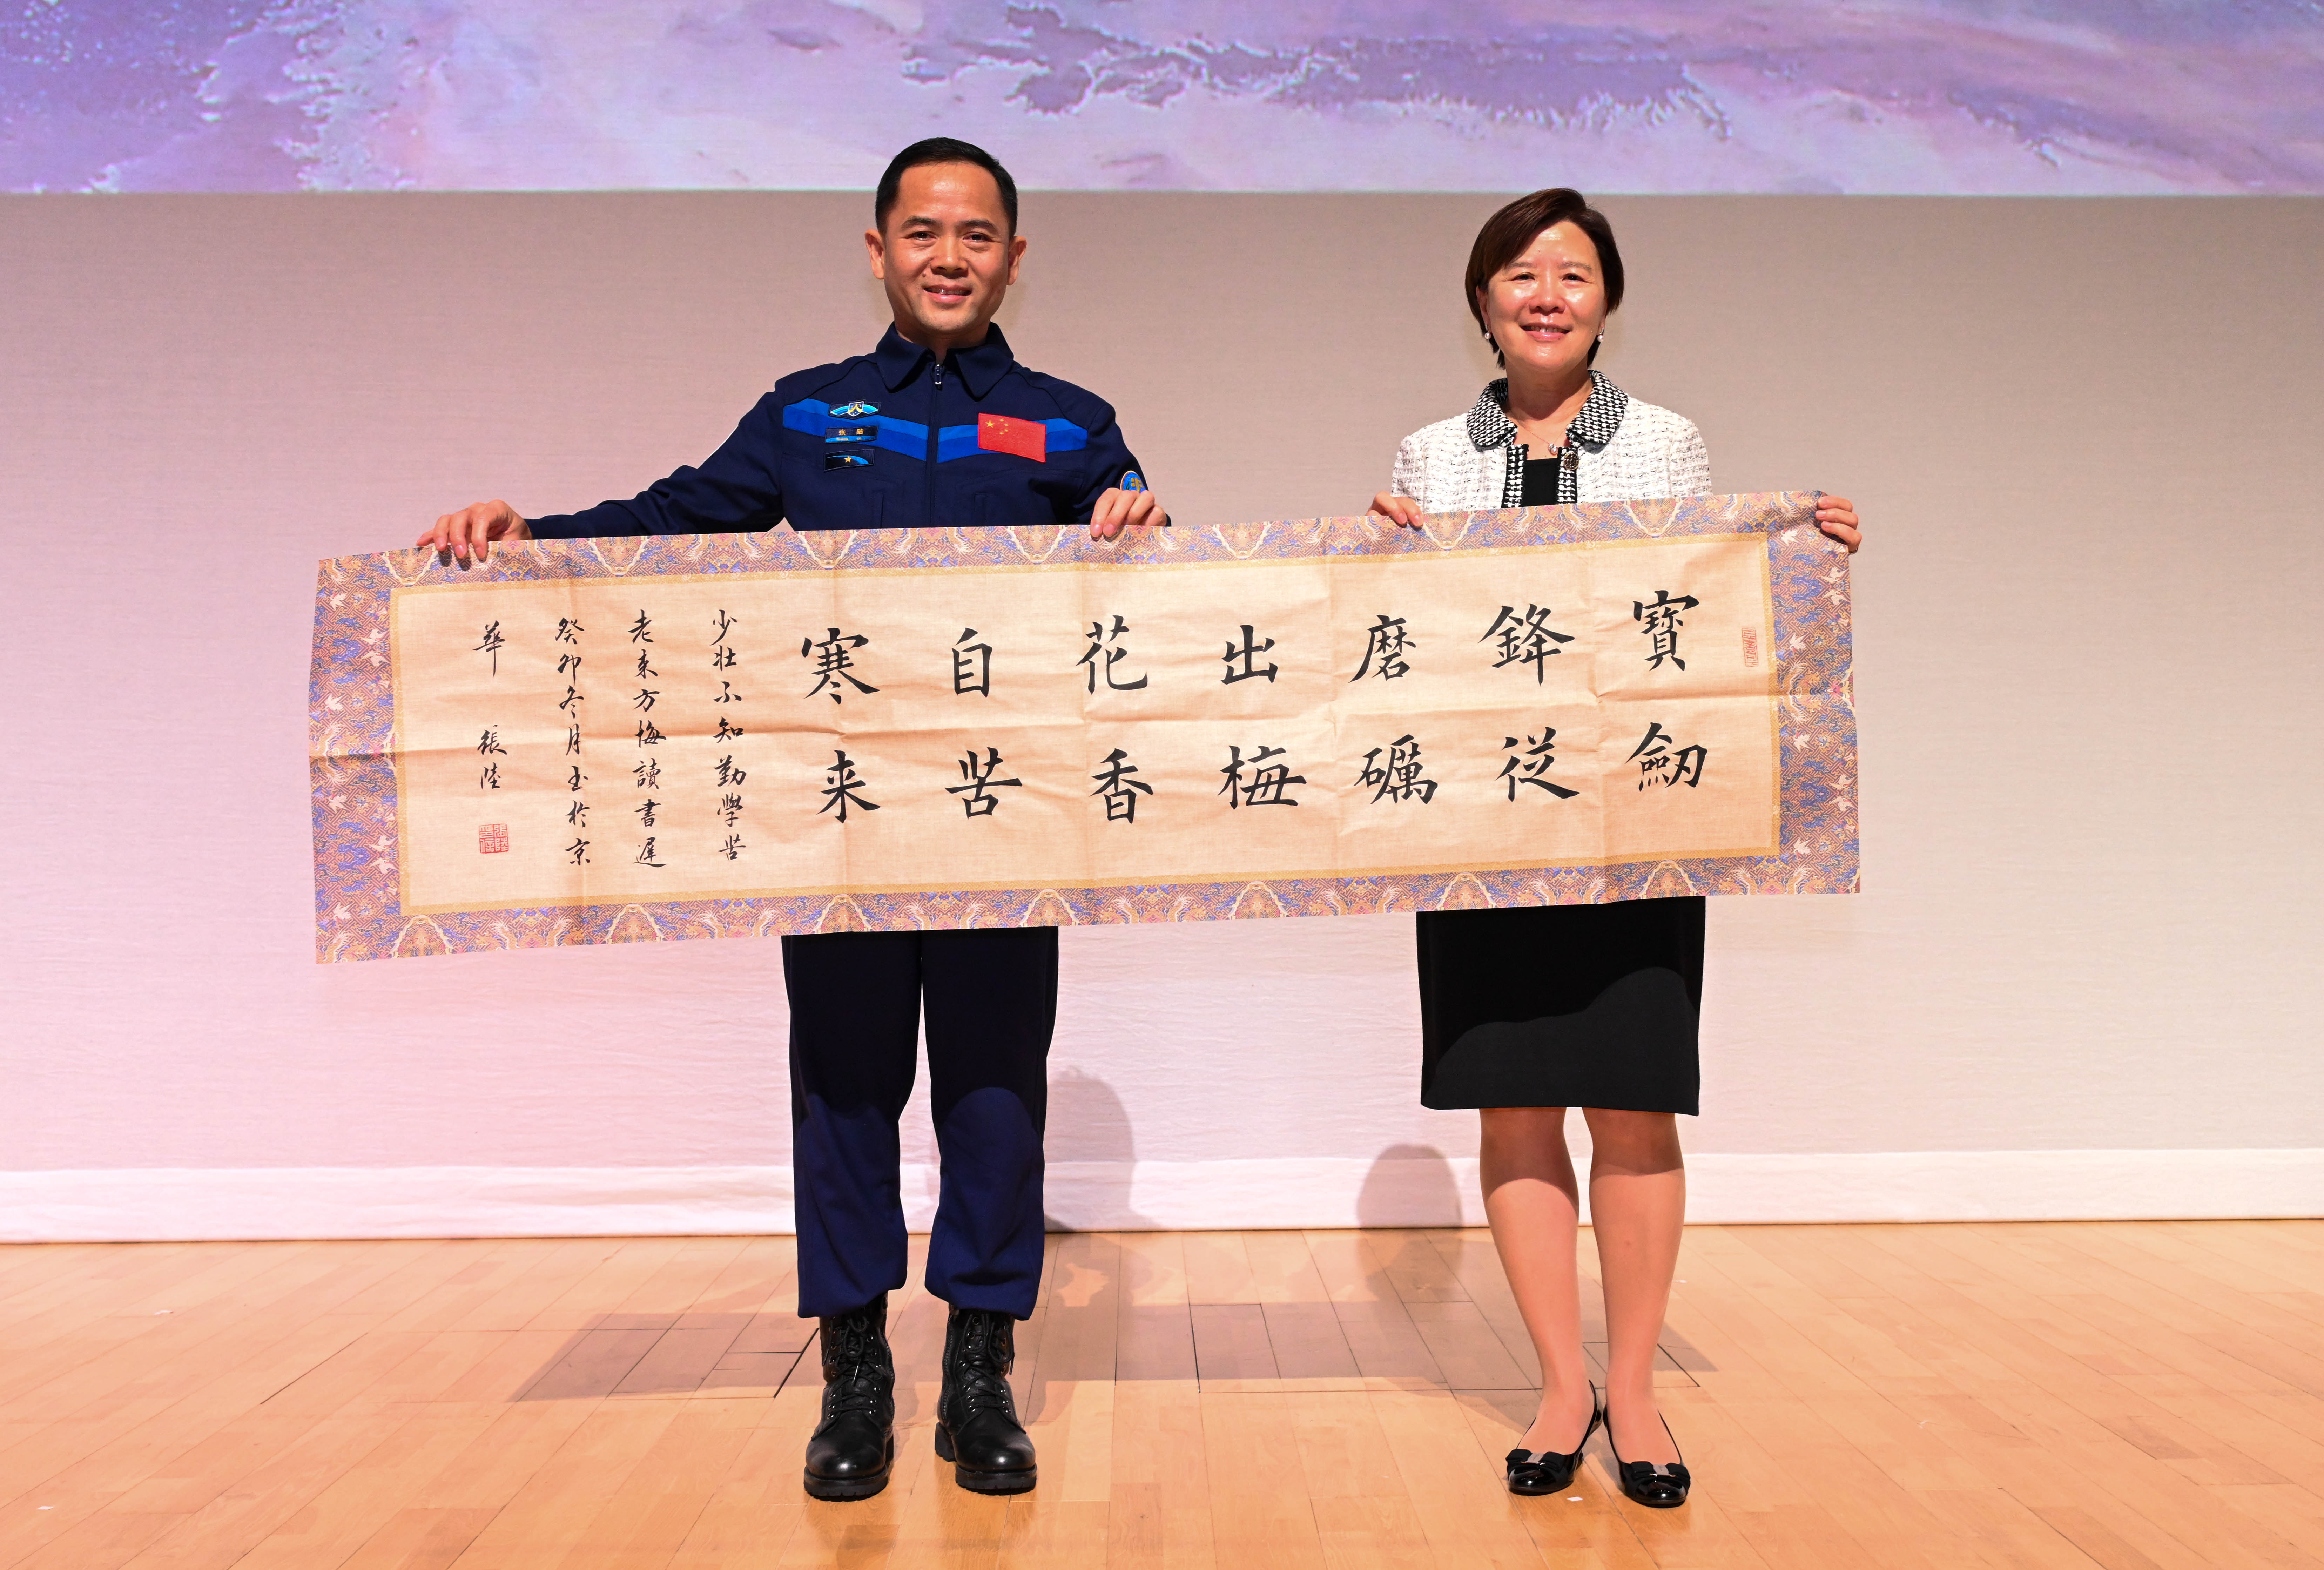 The China Manned Space delegation continued their visit in Hong Kong today (November 30). Photo shows Shenzhou-15 astronaut Mr Zhang Lu (left) and the President of the Hong Kong University of Science and Technology, Professor Nancy Ip (right), attending the dialogue session with teachers and students held at the Hong Kong University of Science and Technology.